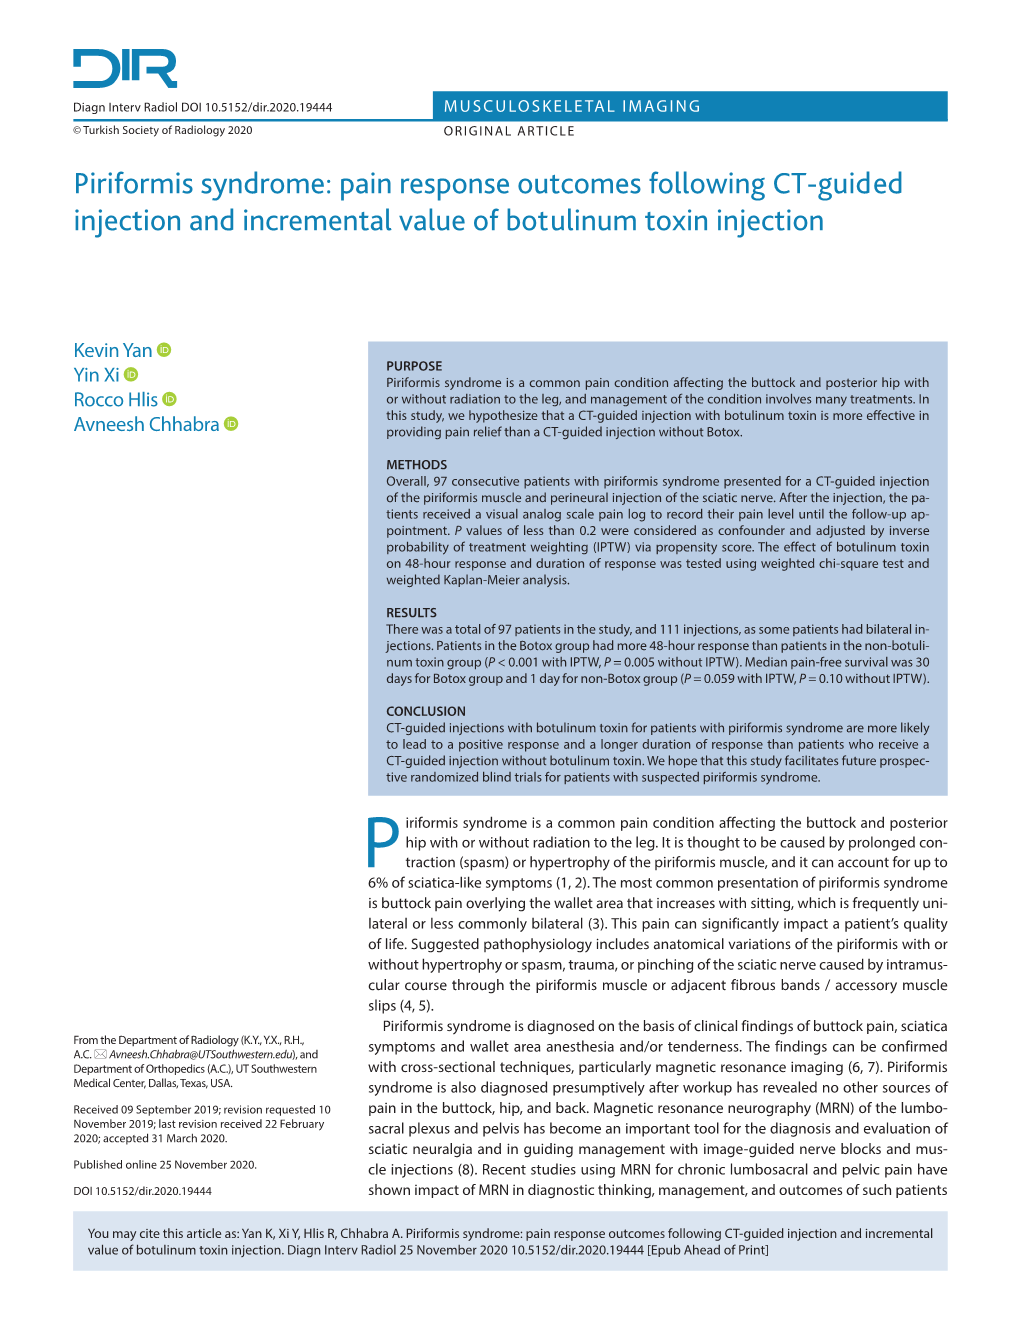 Piriformis Syndrome: Pain Response Outcomes Following CT-Guided Injection and Incremental Value of Botulinum Toxin Injection